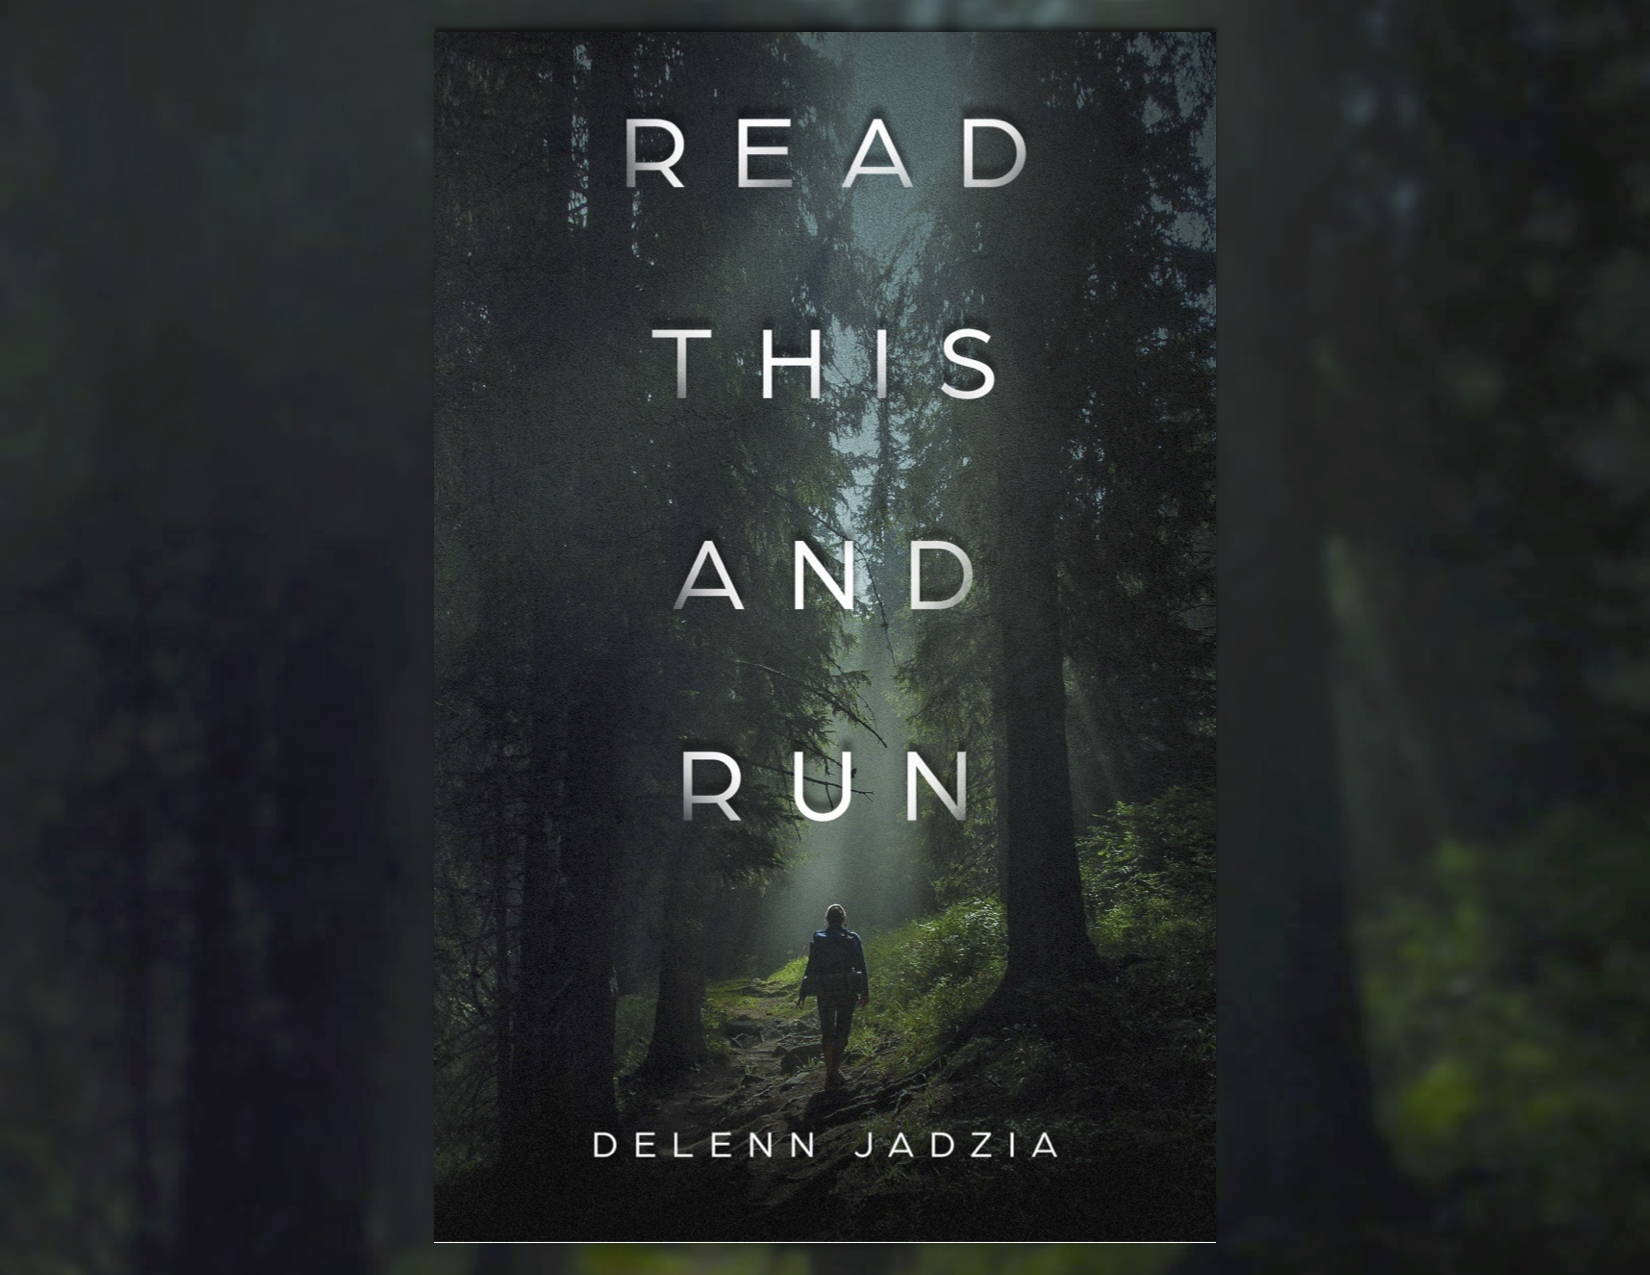 The cover image for the novel Read This and Run by Delenn Jadzia